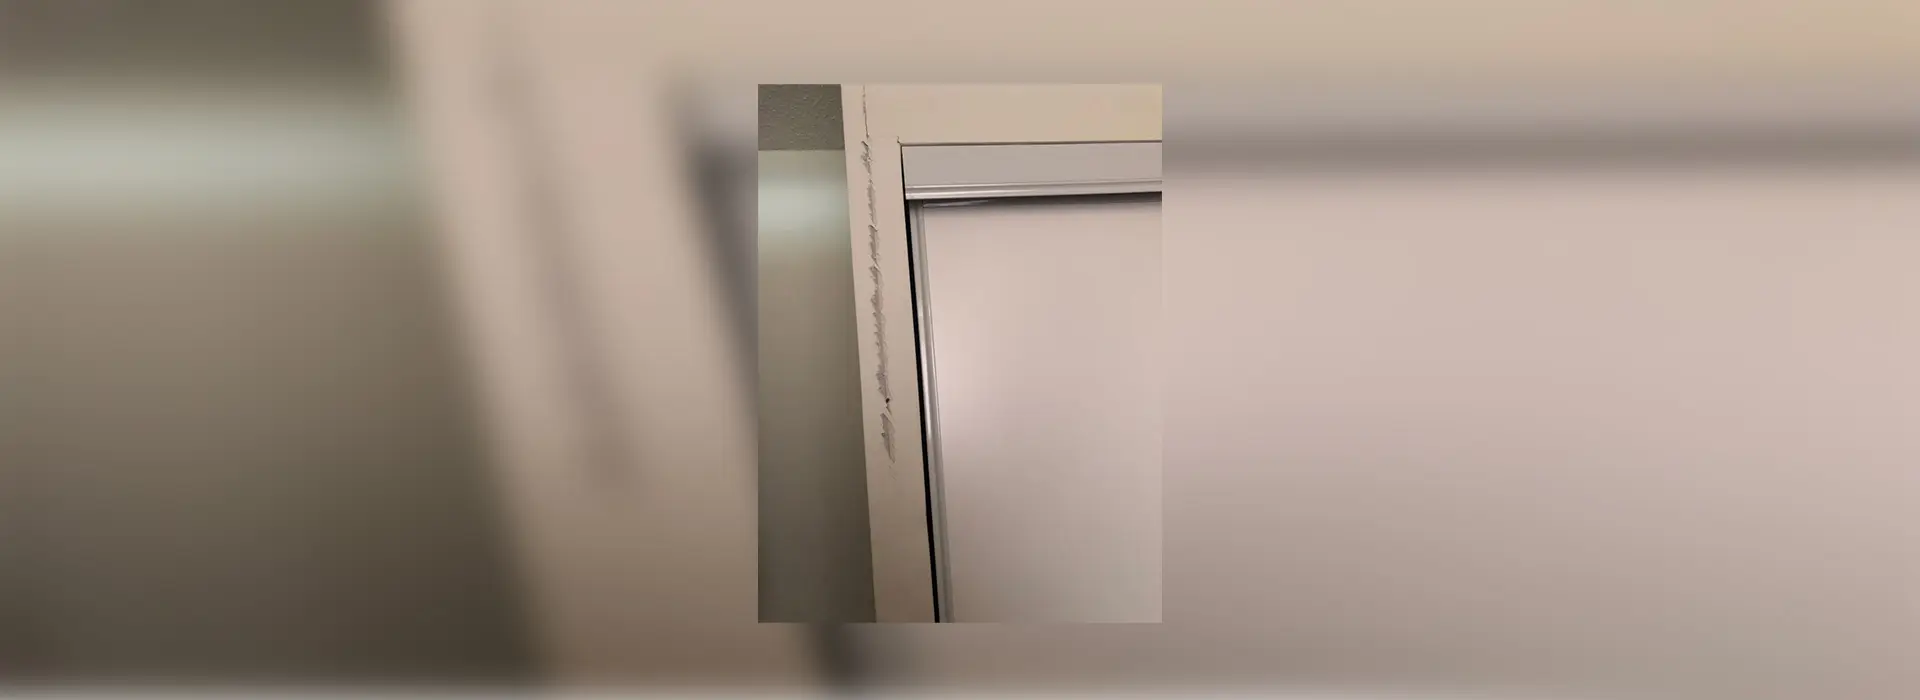 A picture of the outside of a door.